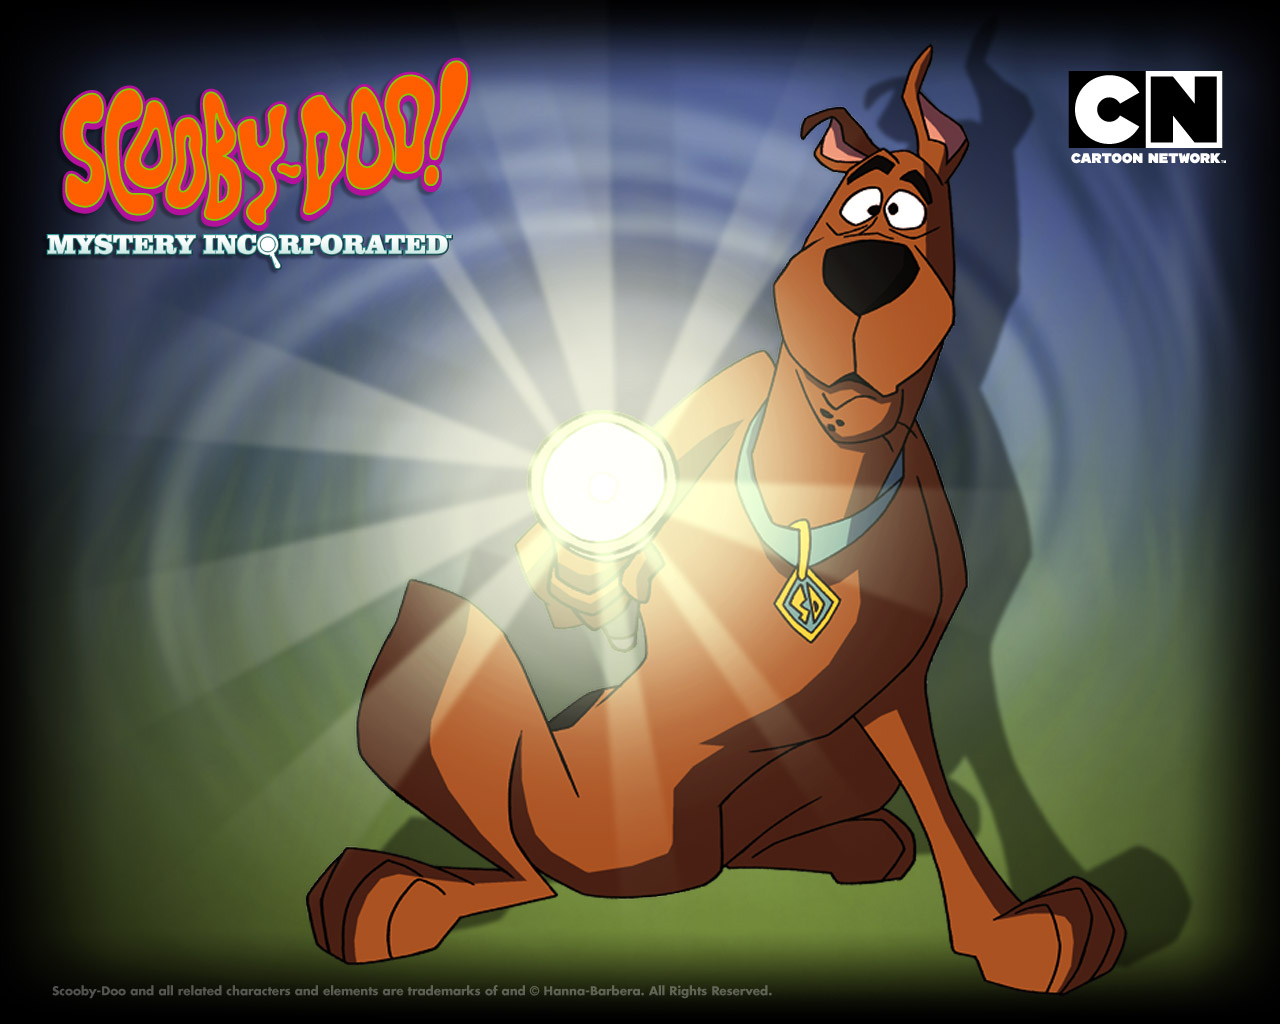 tv show, scooby doo, scooby doo! mystery incorporated